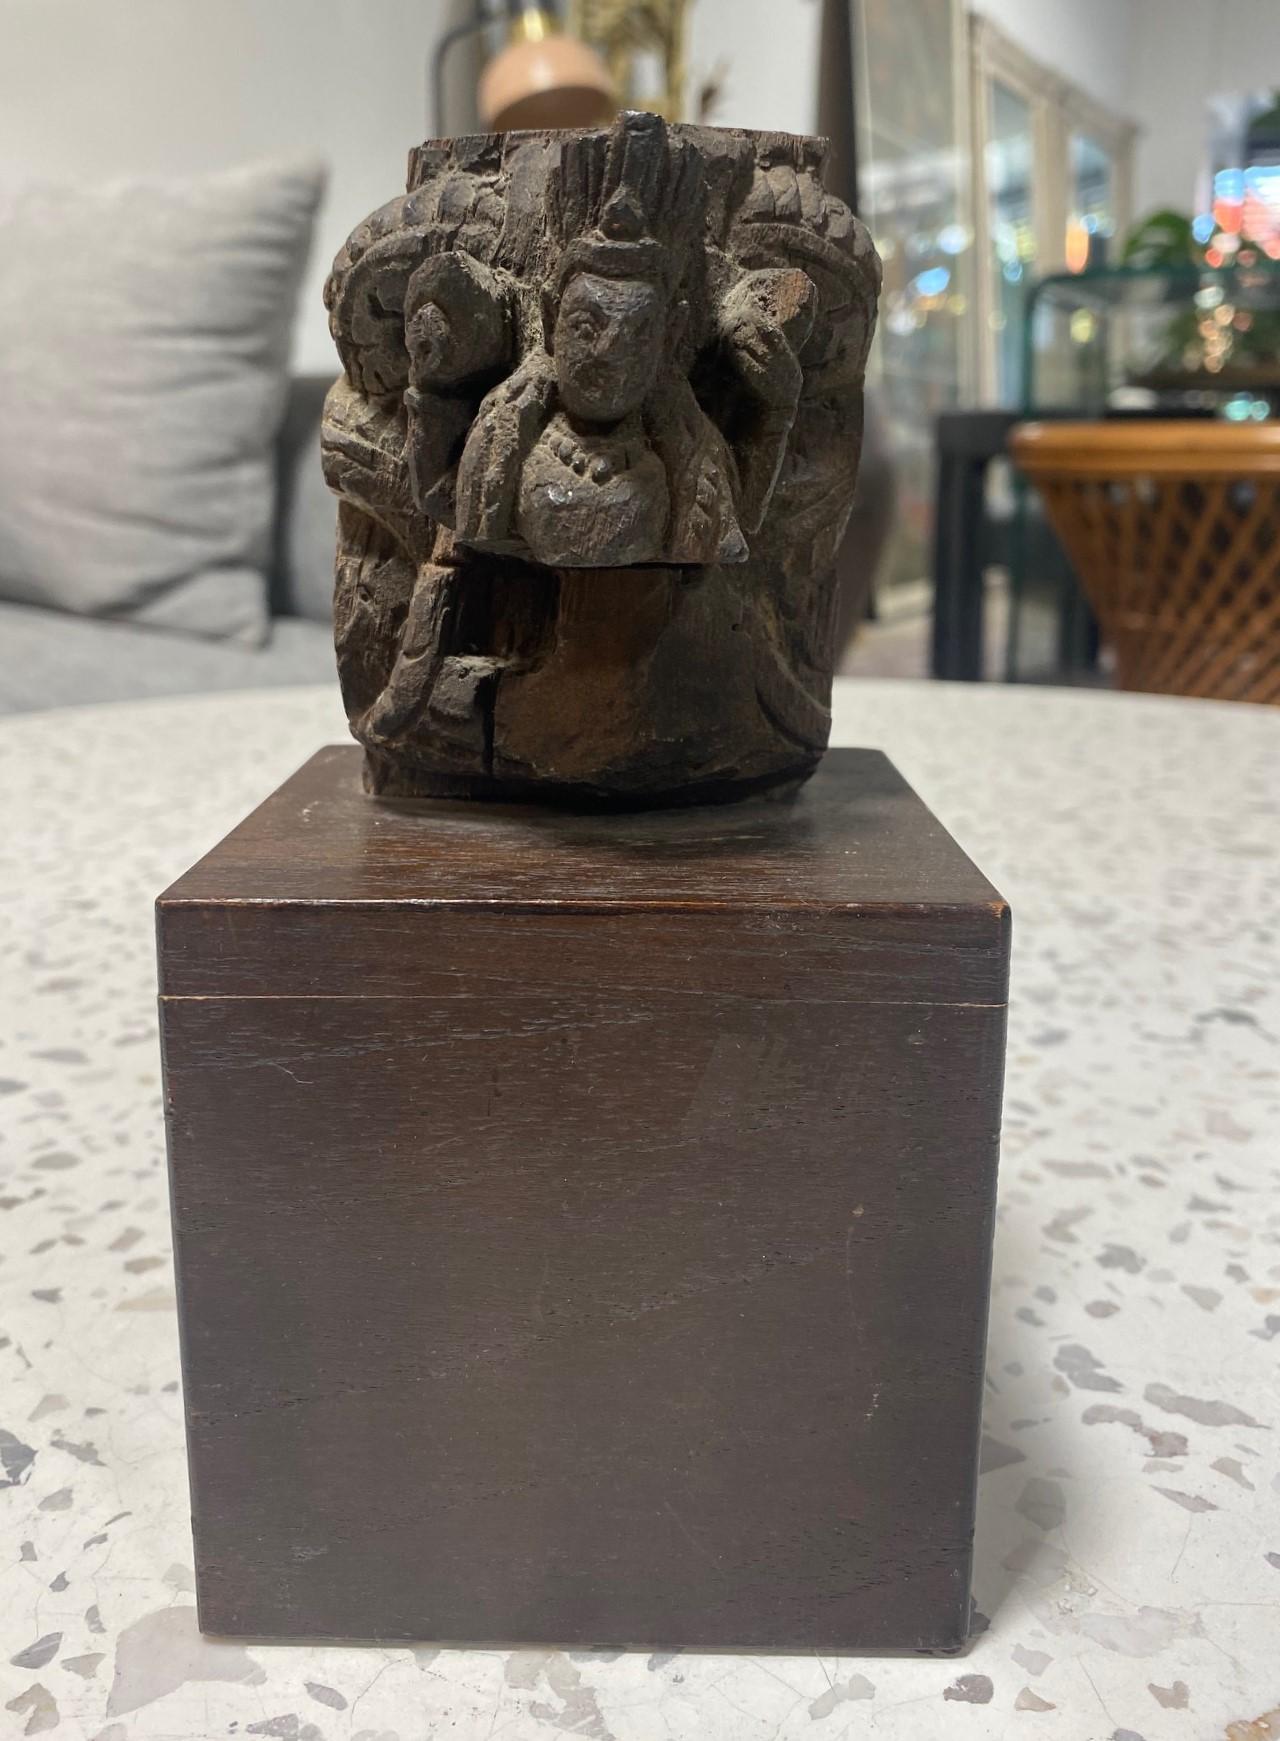 A wonderful Nepalese wood-carved deity sculpture of the Hindu God Vishnu - the god of preservation and the protector and restorer of dharma

This architectural ornament piece is hand-carved from a single piece of wood and likely came from a Hindu